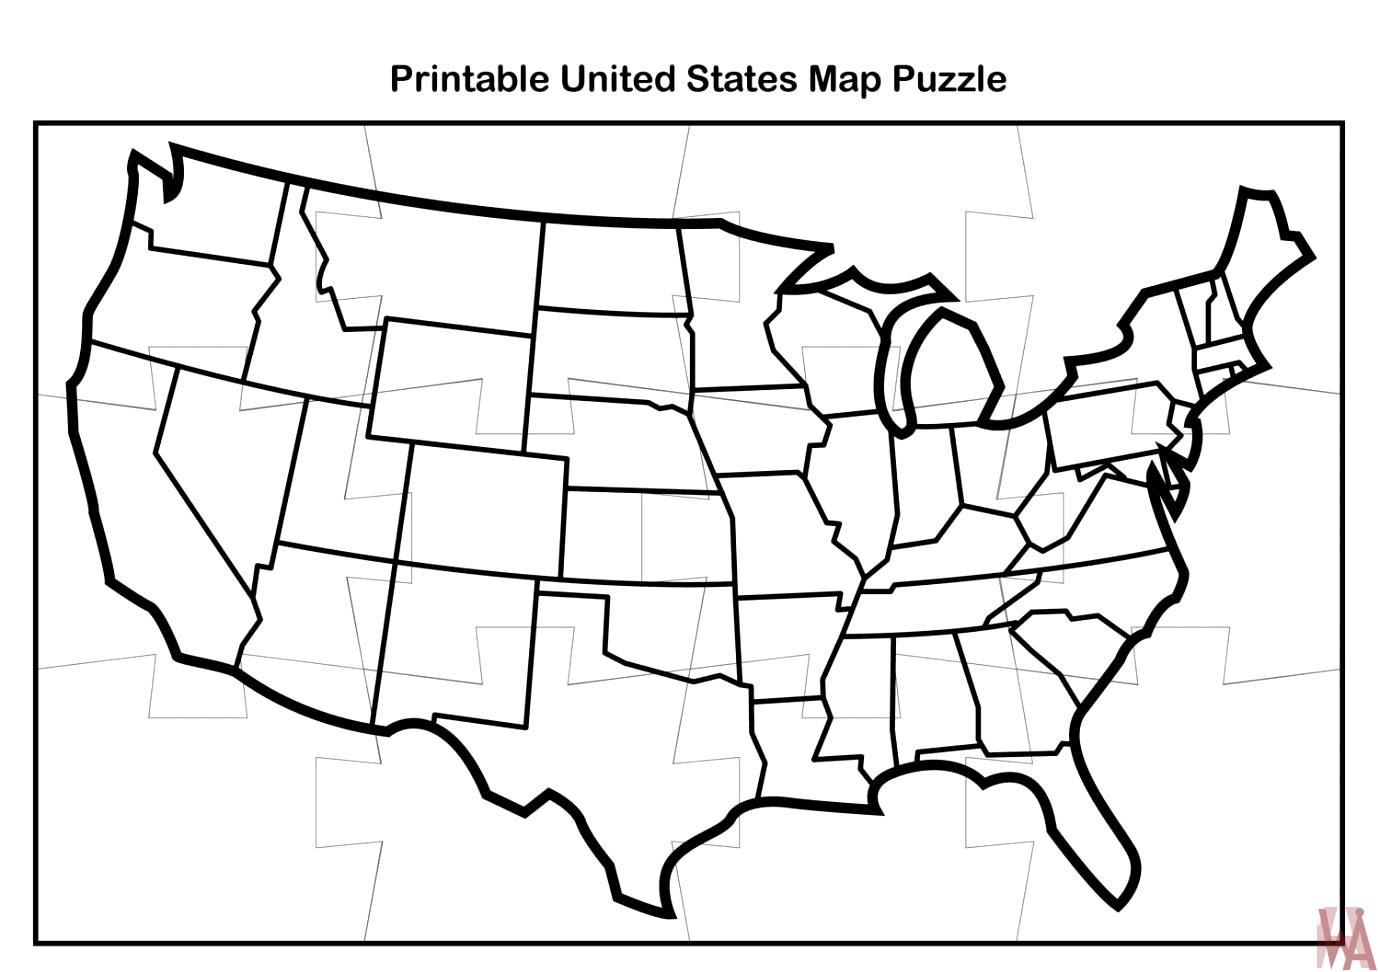 Blank Outline Map Of The United States For Puzzle Whatsanswer